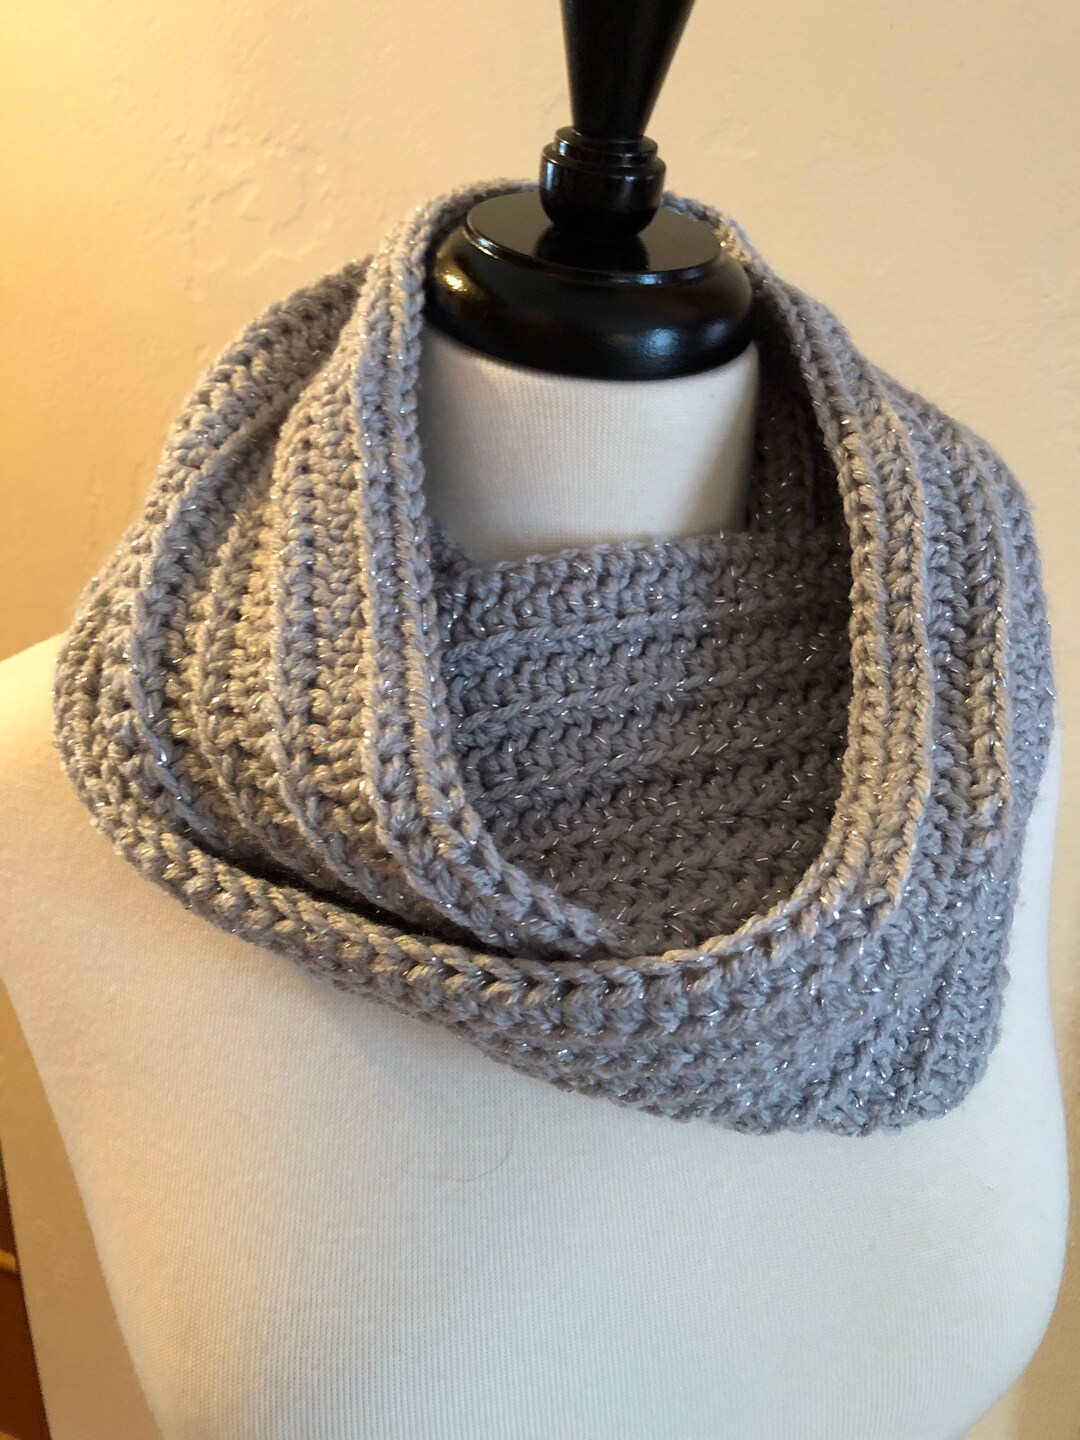 Beautiful heavyweight hand crochet yarn fabric infinity scarf measures  approximately 10 x 25 featuring a black, gray, and white tone large loop  lock style., 730846